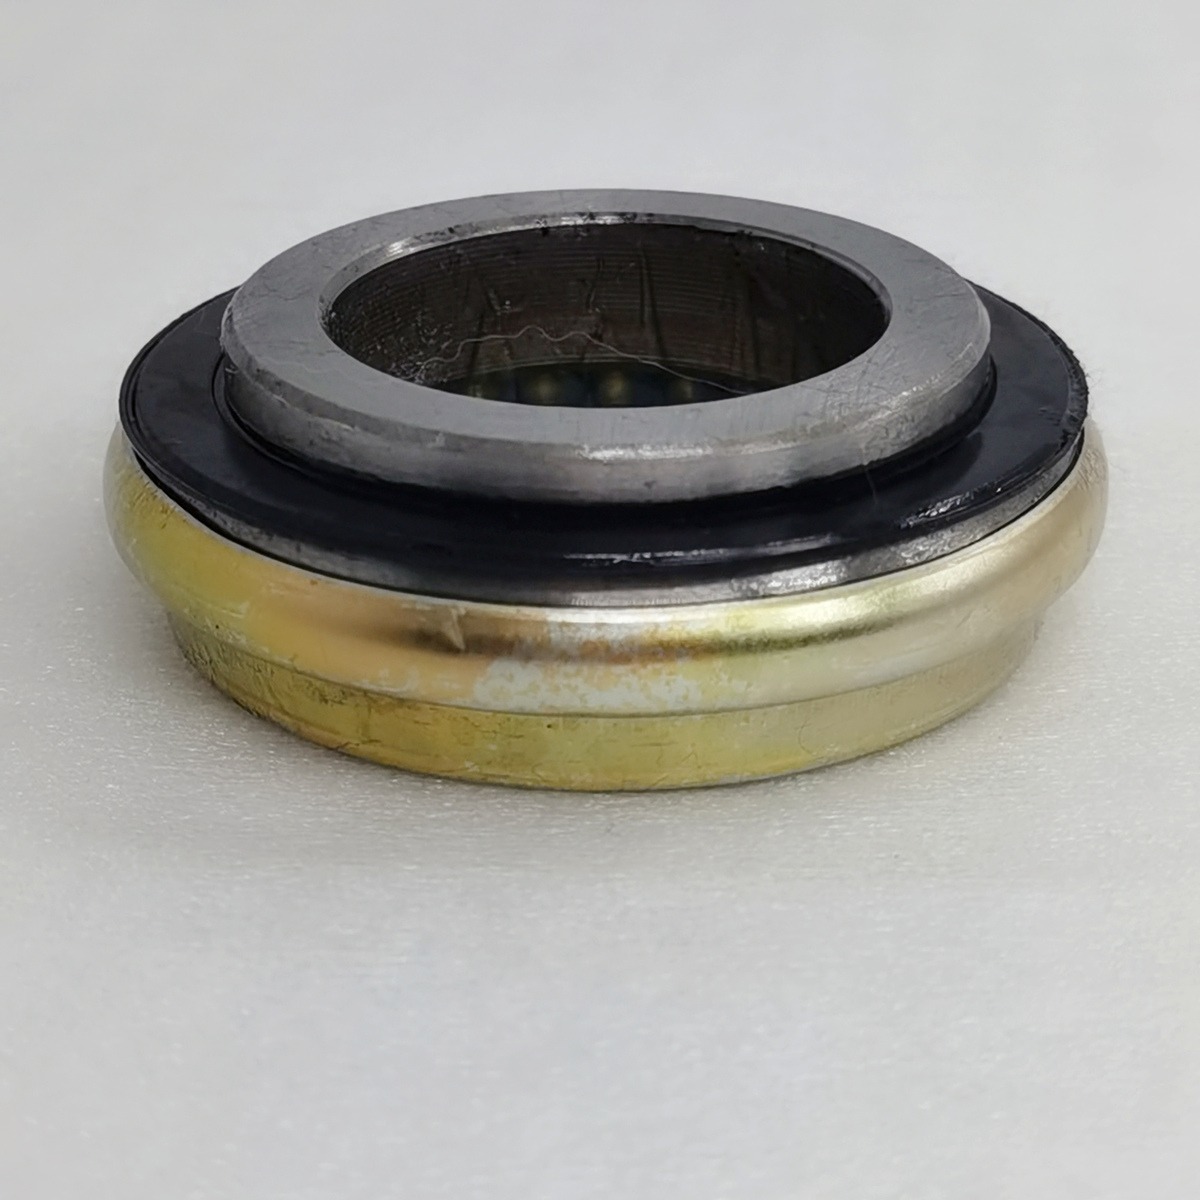 Hot Sale Motorcycle DAYANG  BEIYI Parts 698909   damping shock absorption  bearings Availbable   A Class   China  high quality